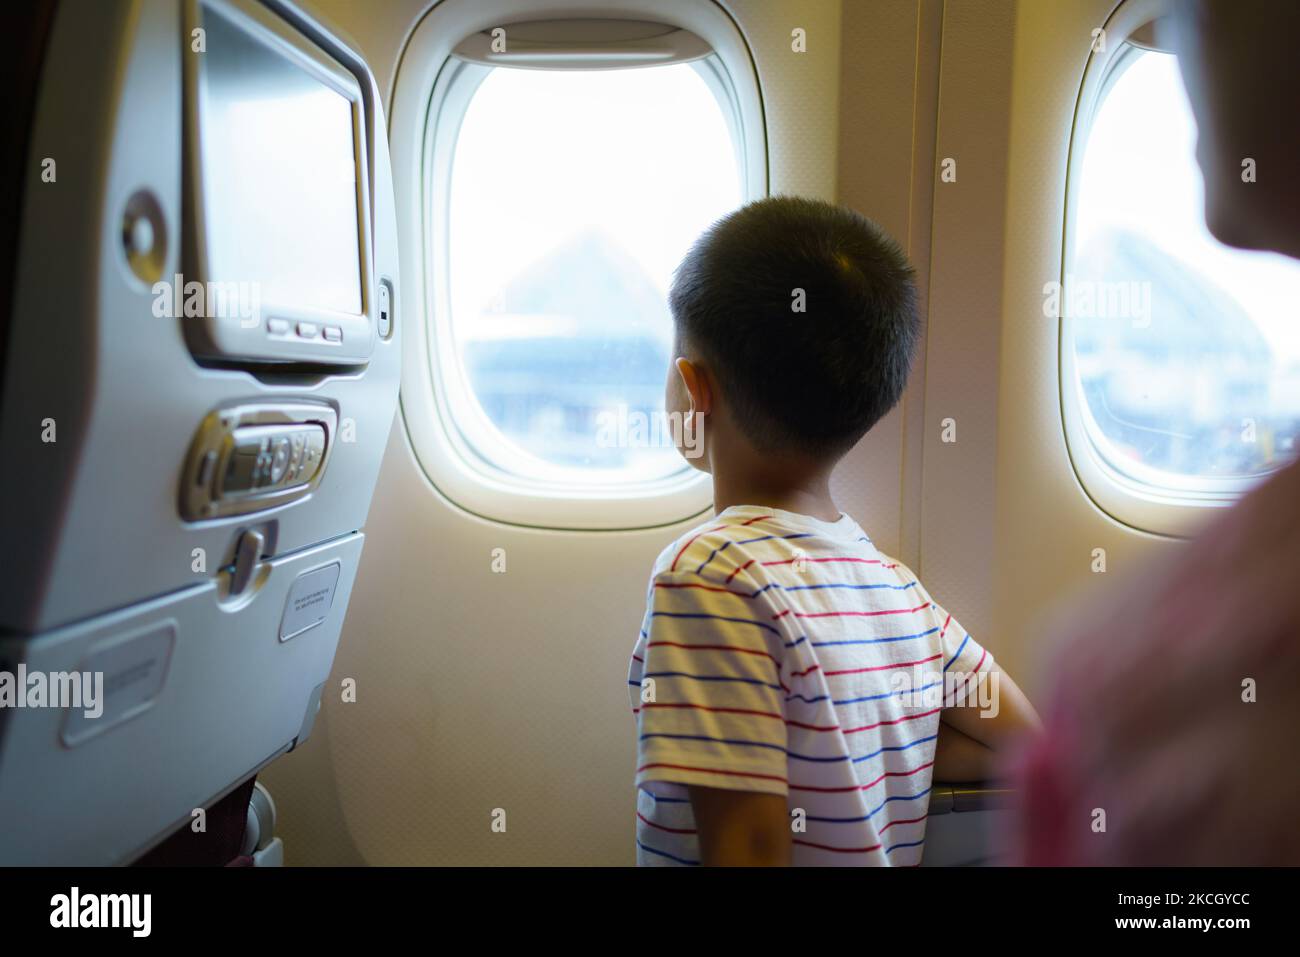 Asian children look at the aerial view of the sky and clouds outside the plane window while sitting on the plane seat. Stock Photo